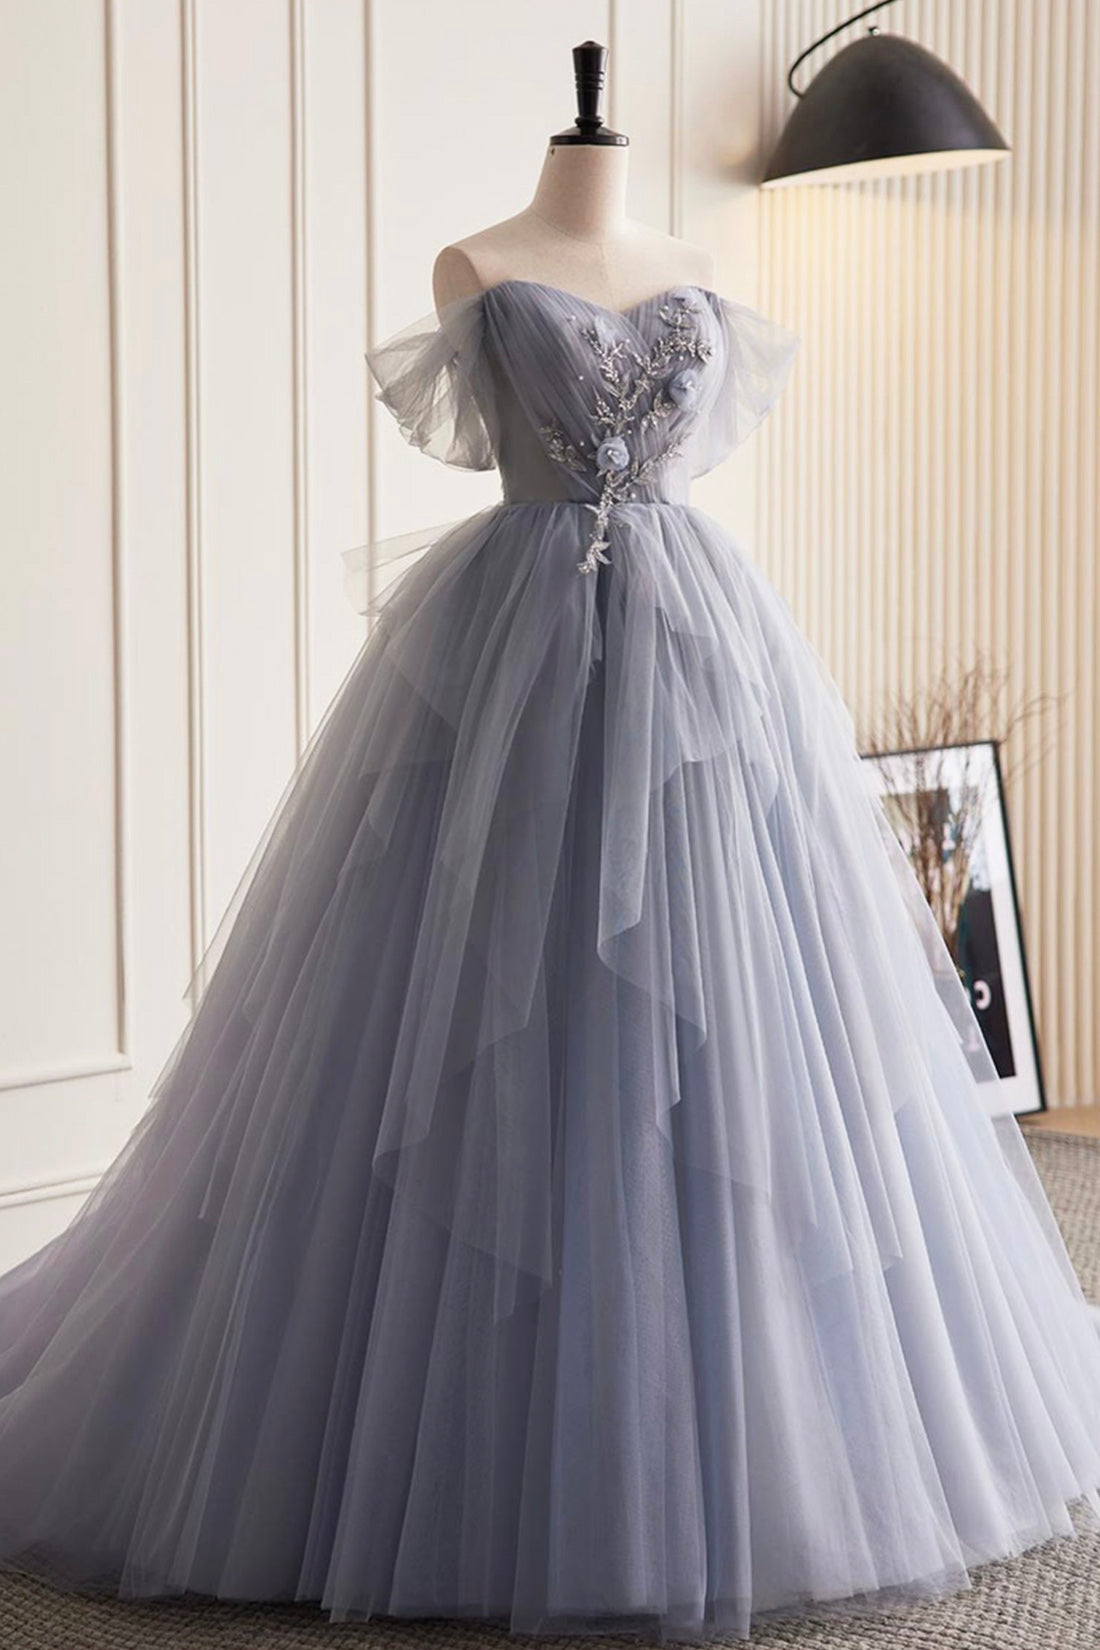 Strapless Prom Dress, Gray Tulle Long Prom Dress, Off Shoulder Evening Dress Party Dress